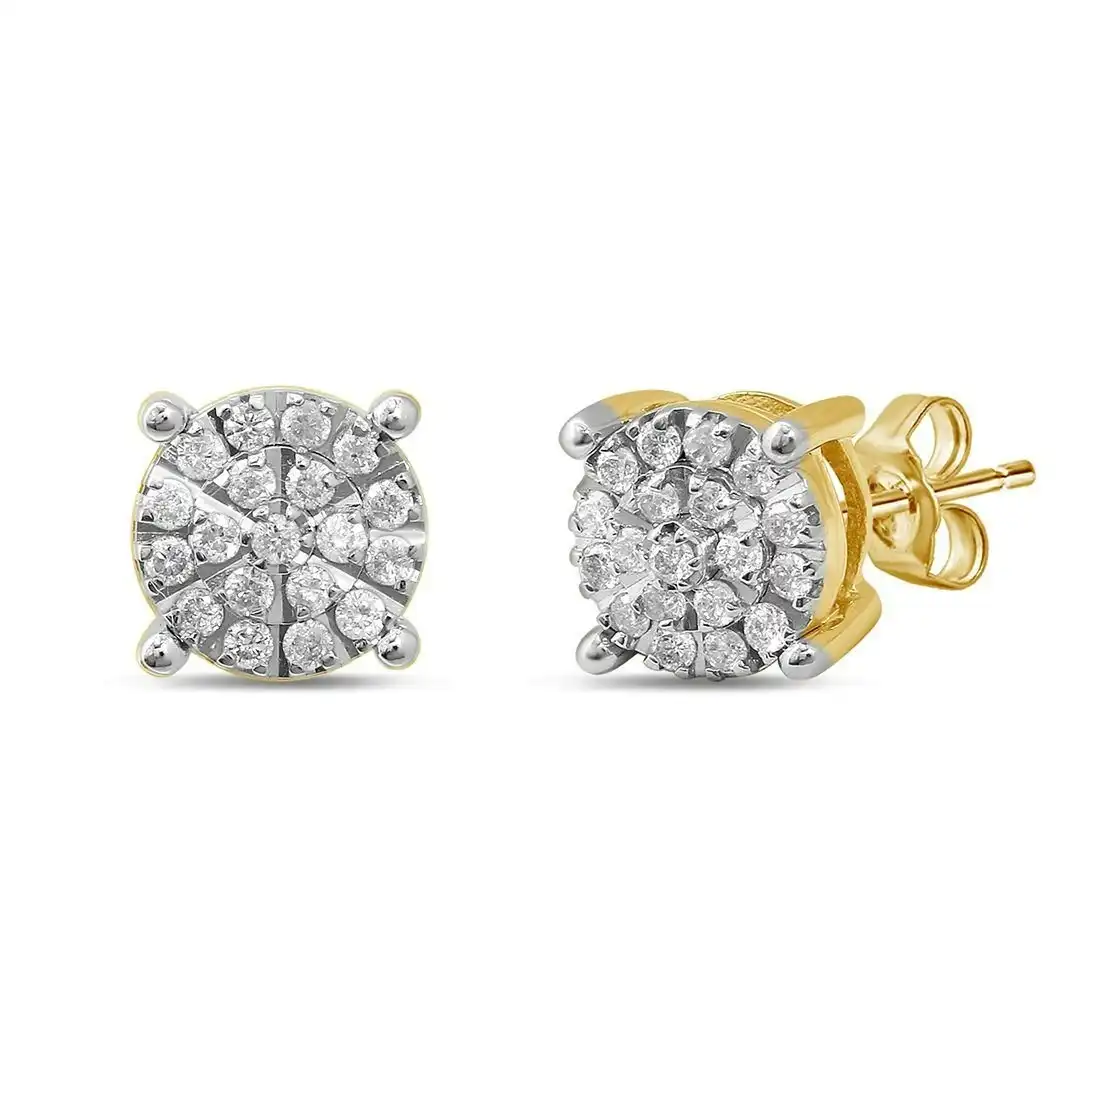 Earrings with 1/4ct of Diamonds in 9ct Yellow Gold